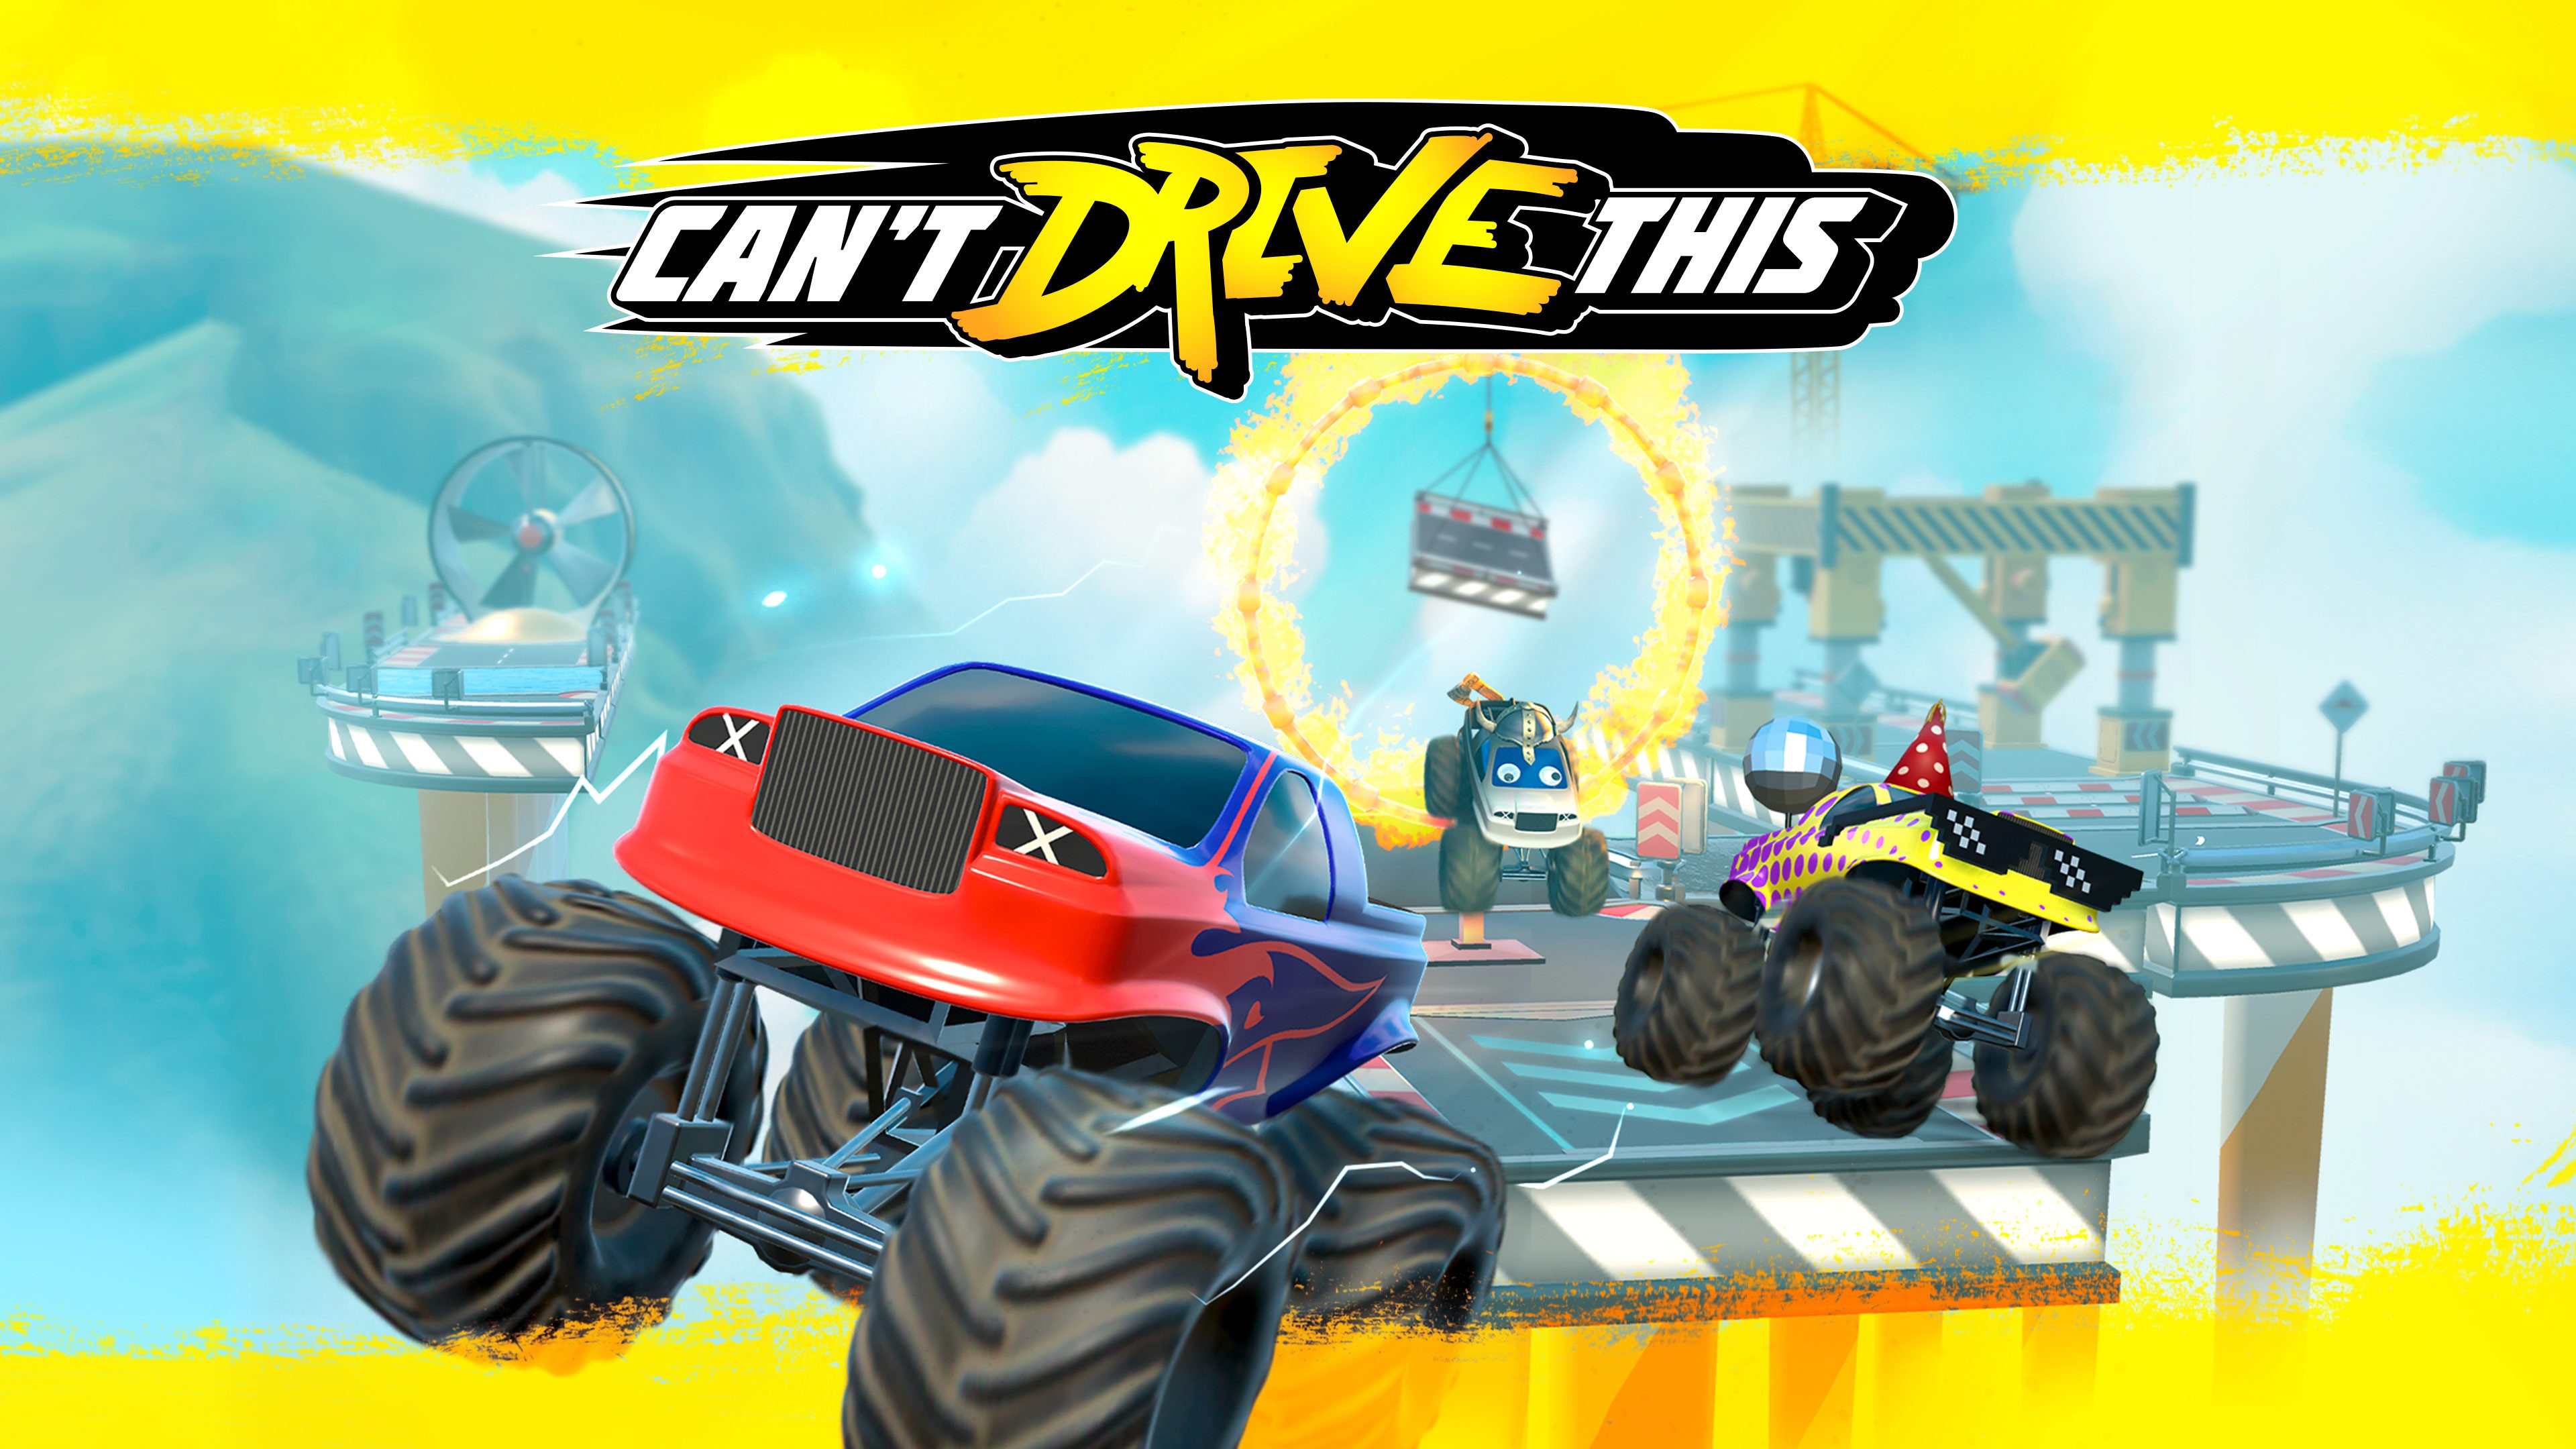 Video For Party Game Racer Can’t Drive This Coming to Xbox on March 19